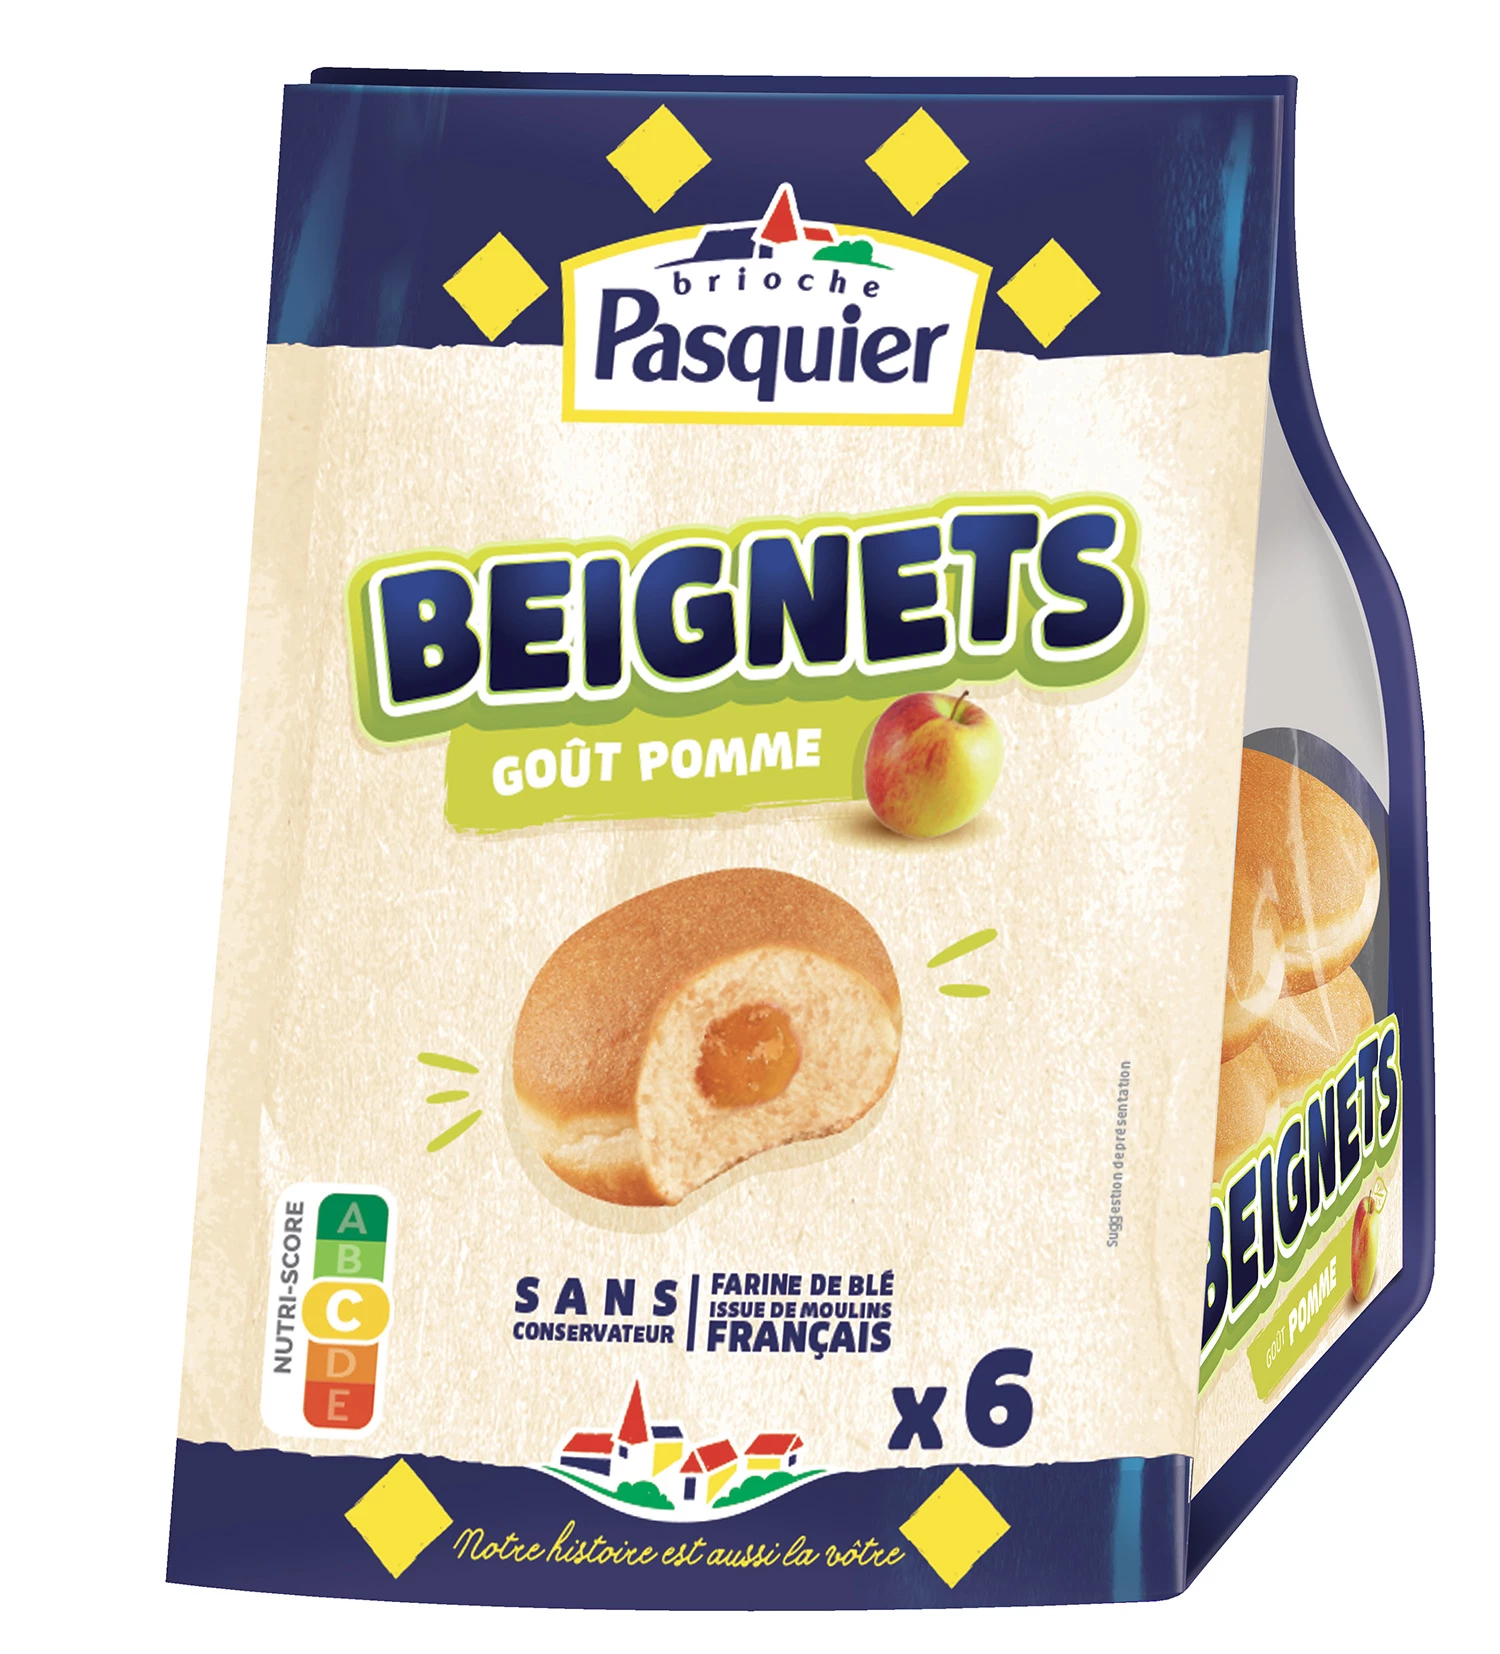 Beignets Pomme Hsh 330g